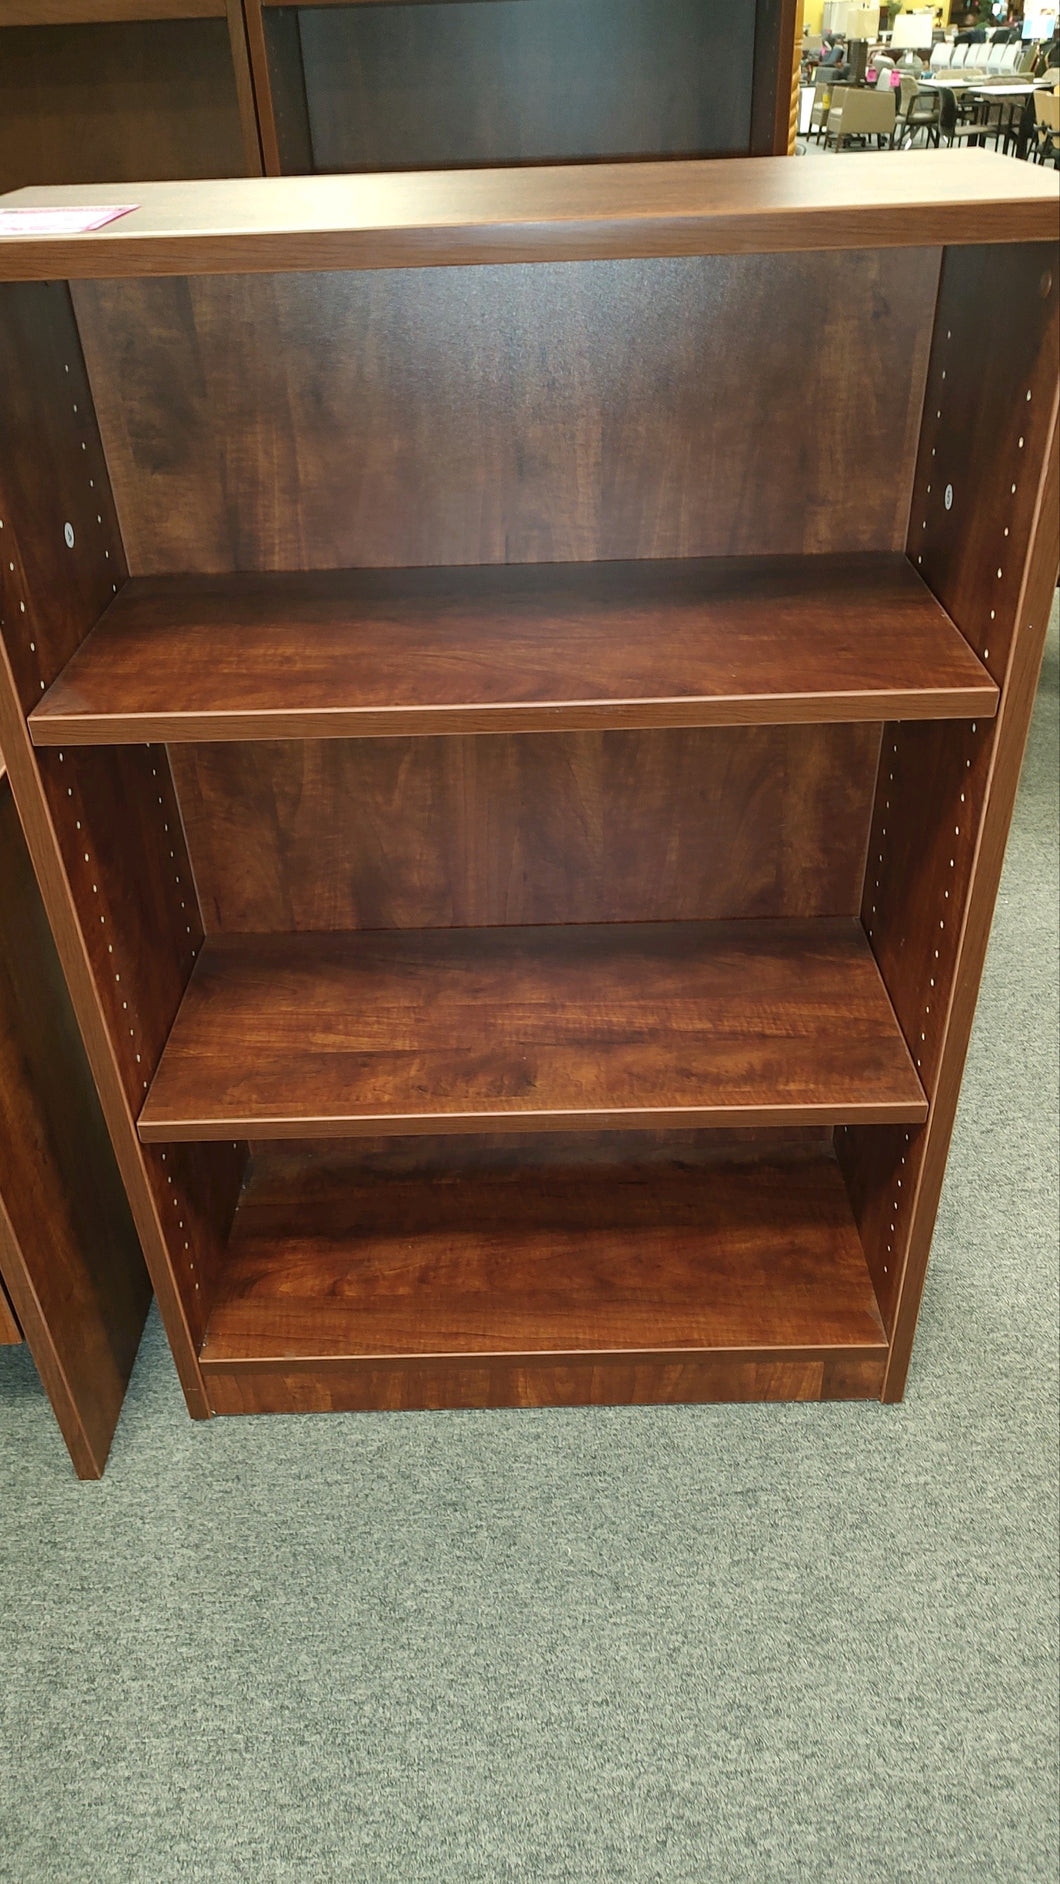 R24200 4' Cherry Laminate Used Bookcase $149.98 - 1 Only!